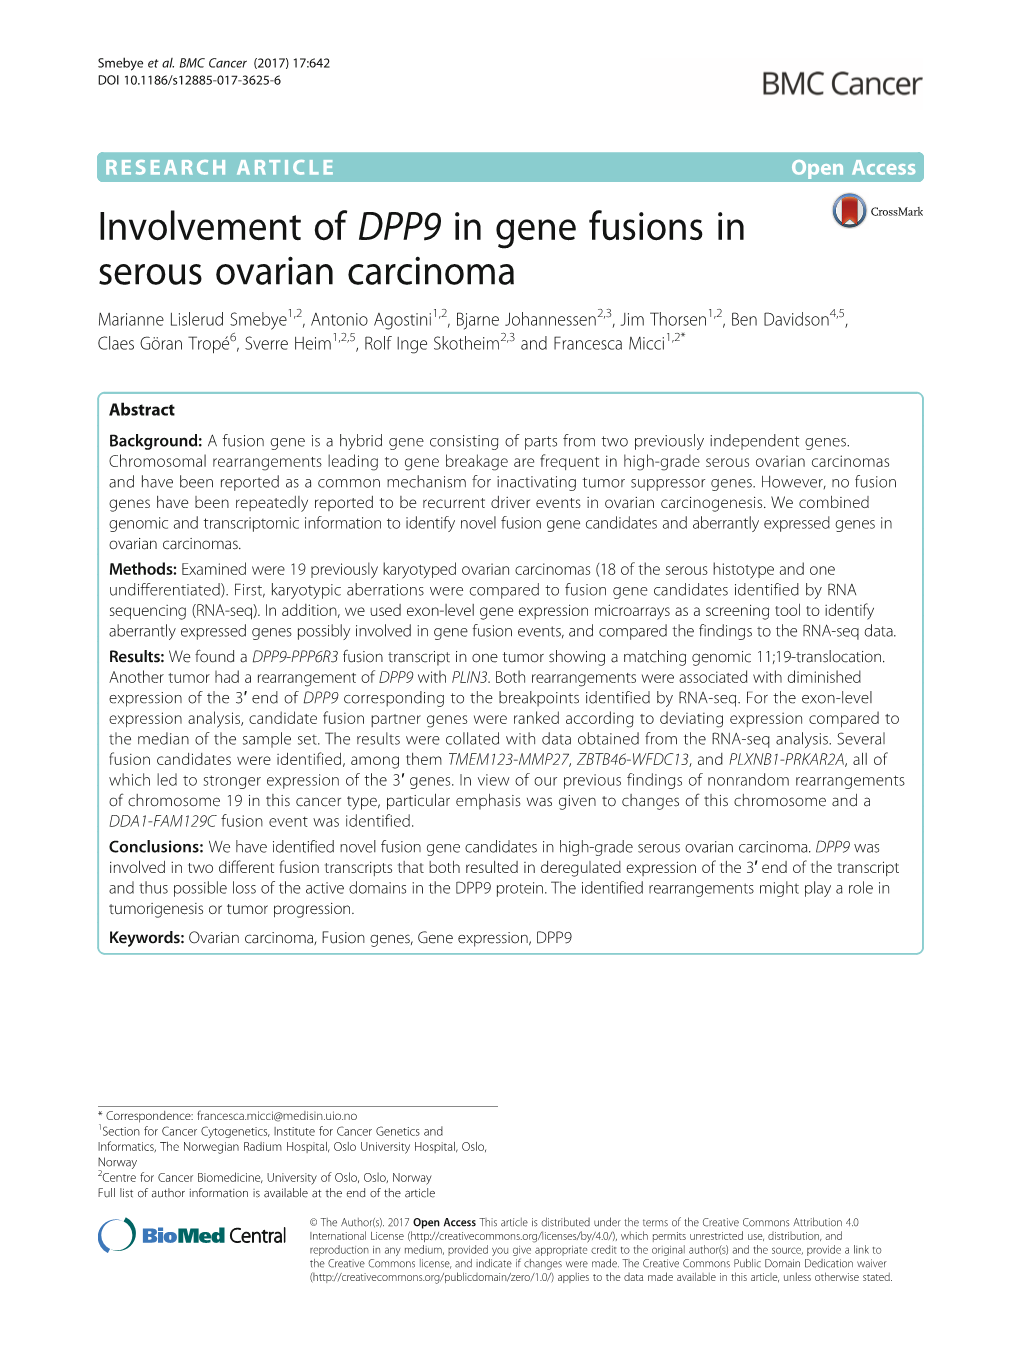 Involvement of DPP9 in Gene Fusions in Serous Ovarian Carcinoma